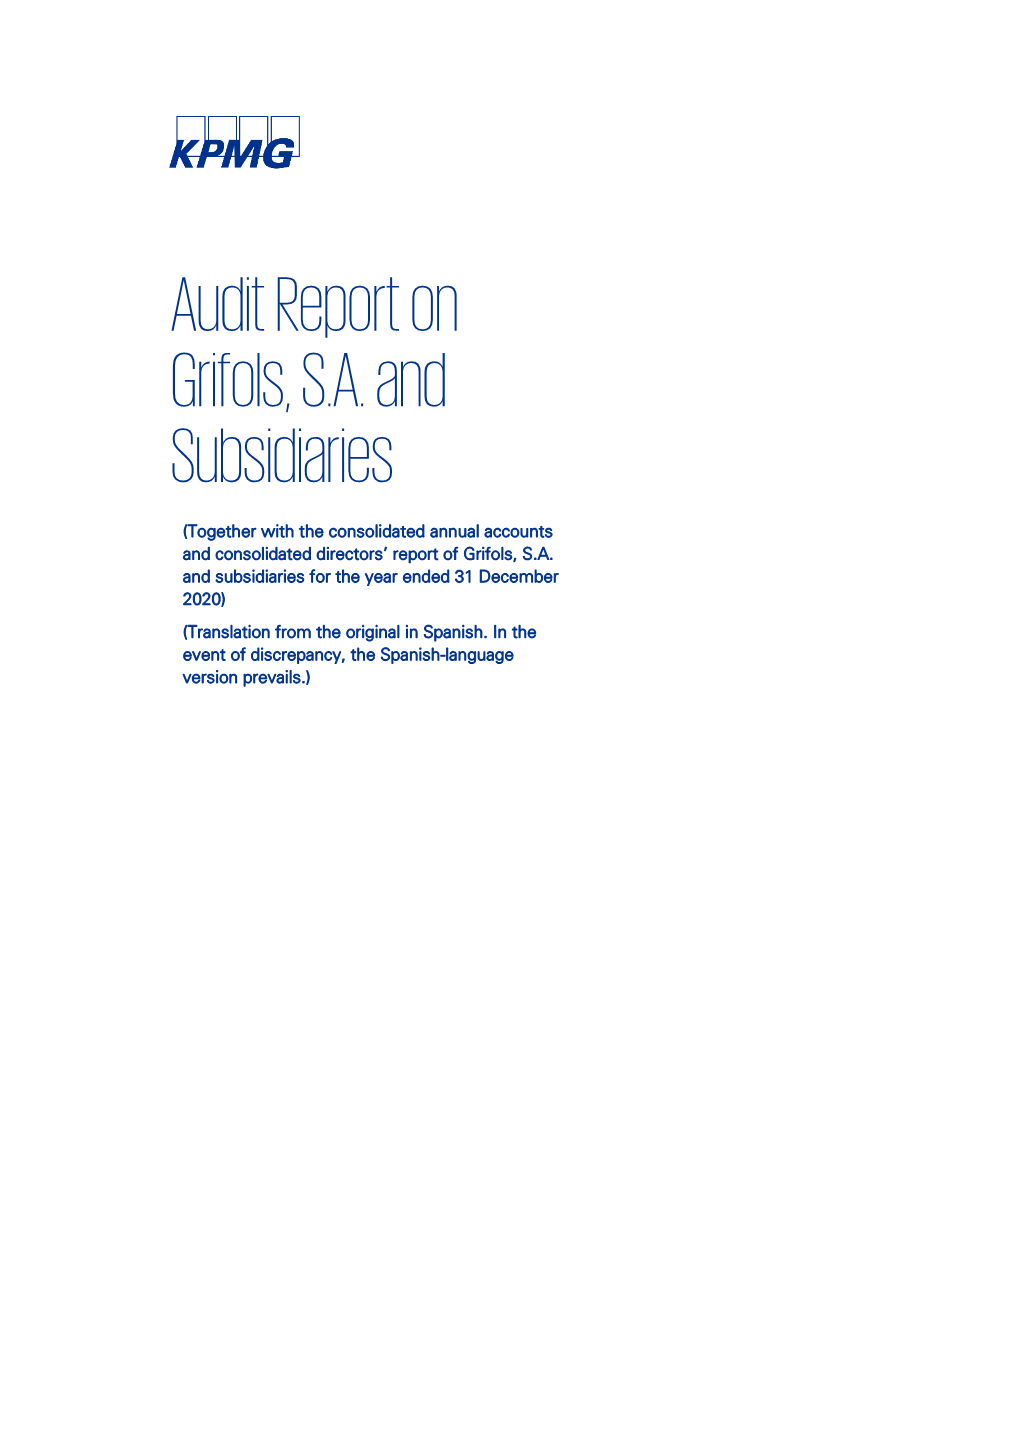 Audit Report on Grifols, S.A. and Subsidiaries